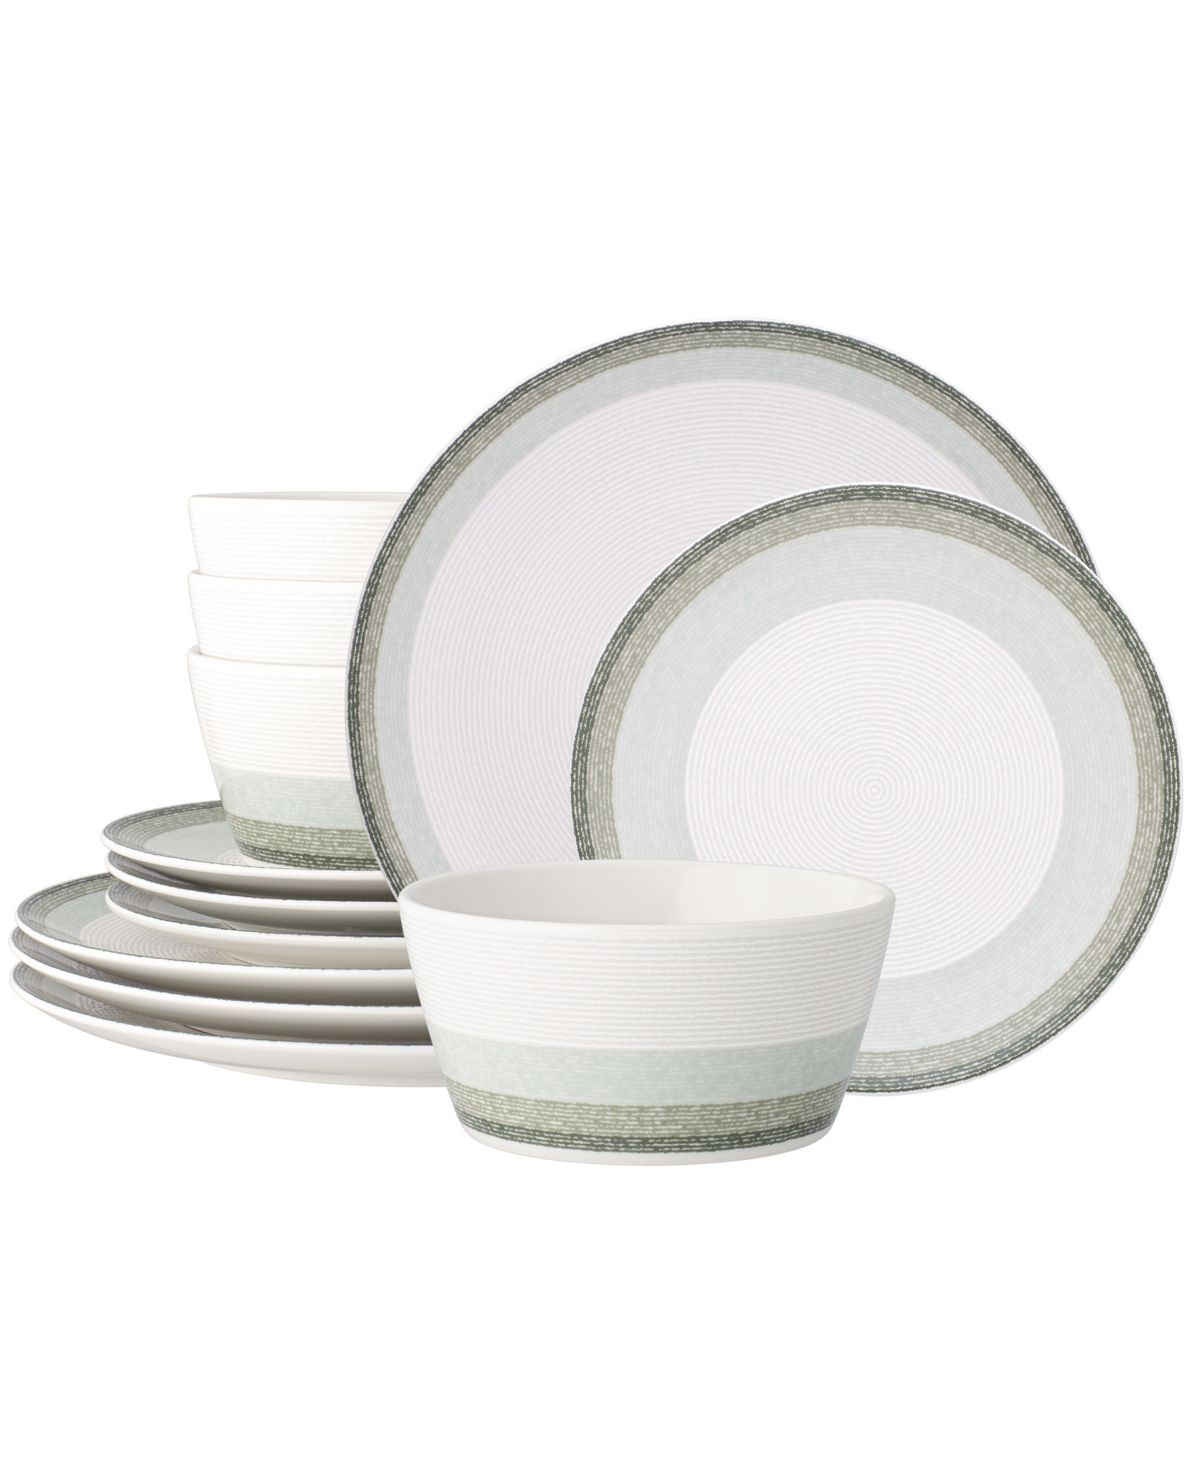 Colorscapes Desert Layers 12 Piece Coupe Dinnerware Set - Navy